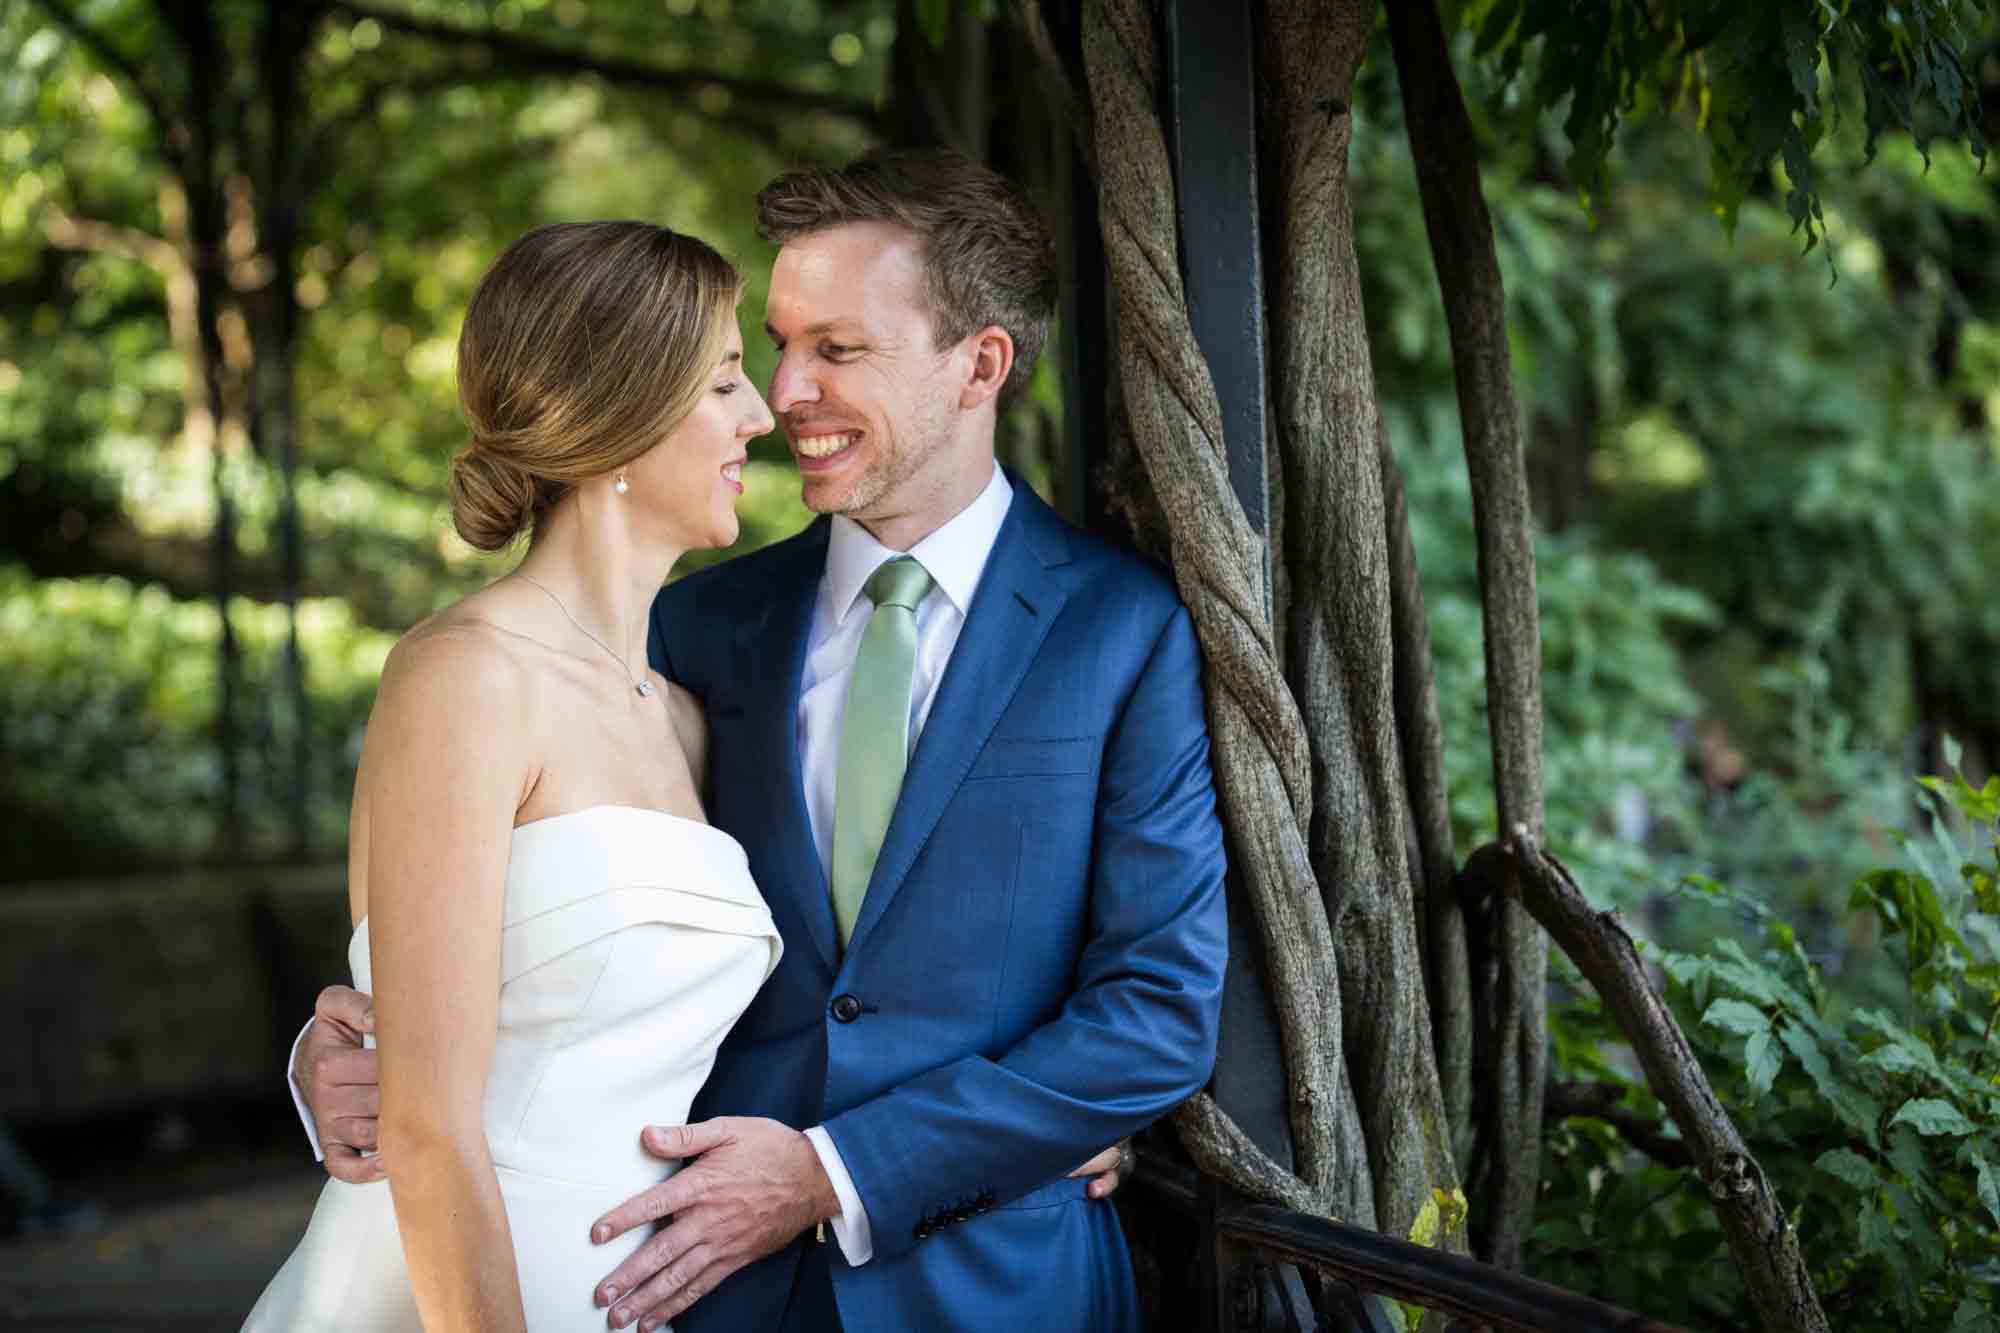 Couple cuddling on Wisteria Terrace during a Conservatory Garden wedding in Central Park